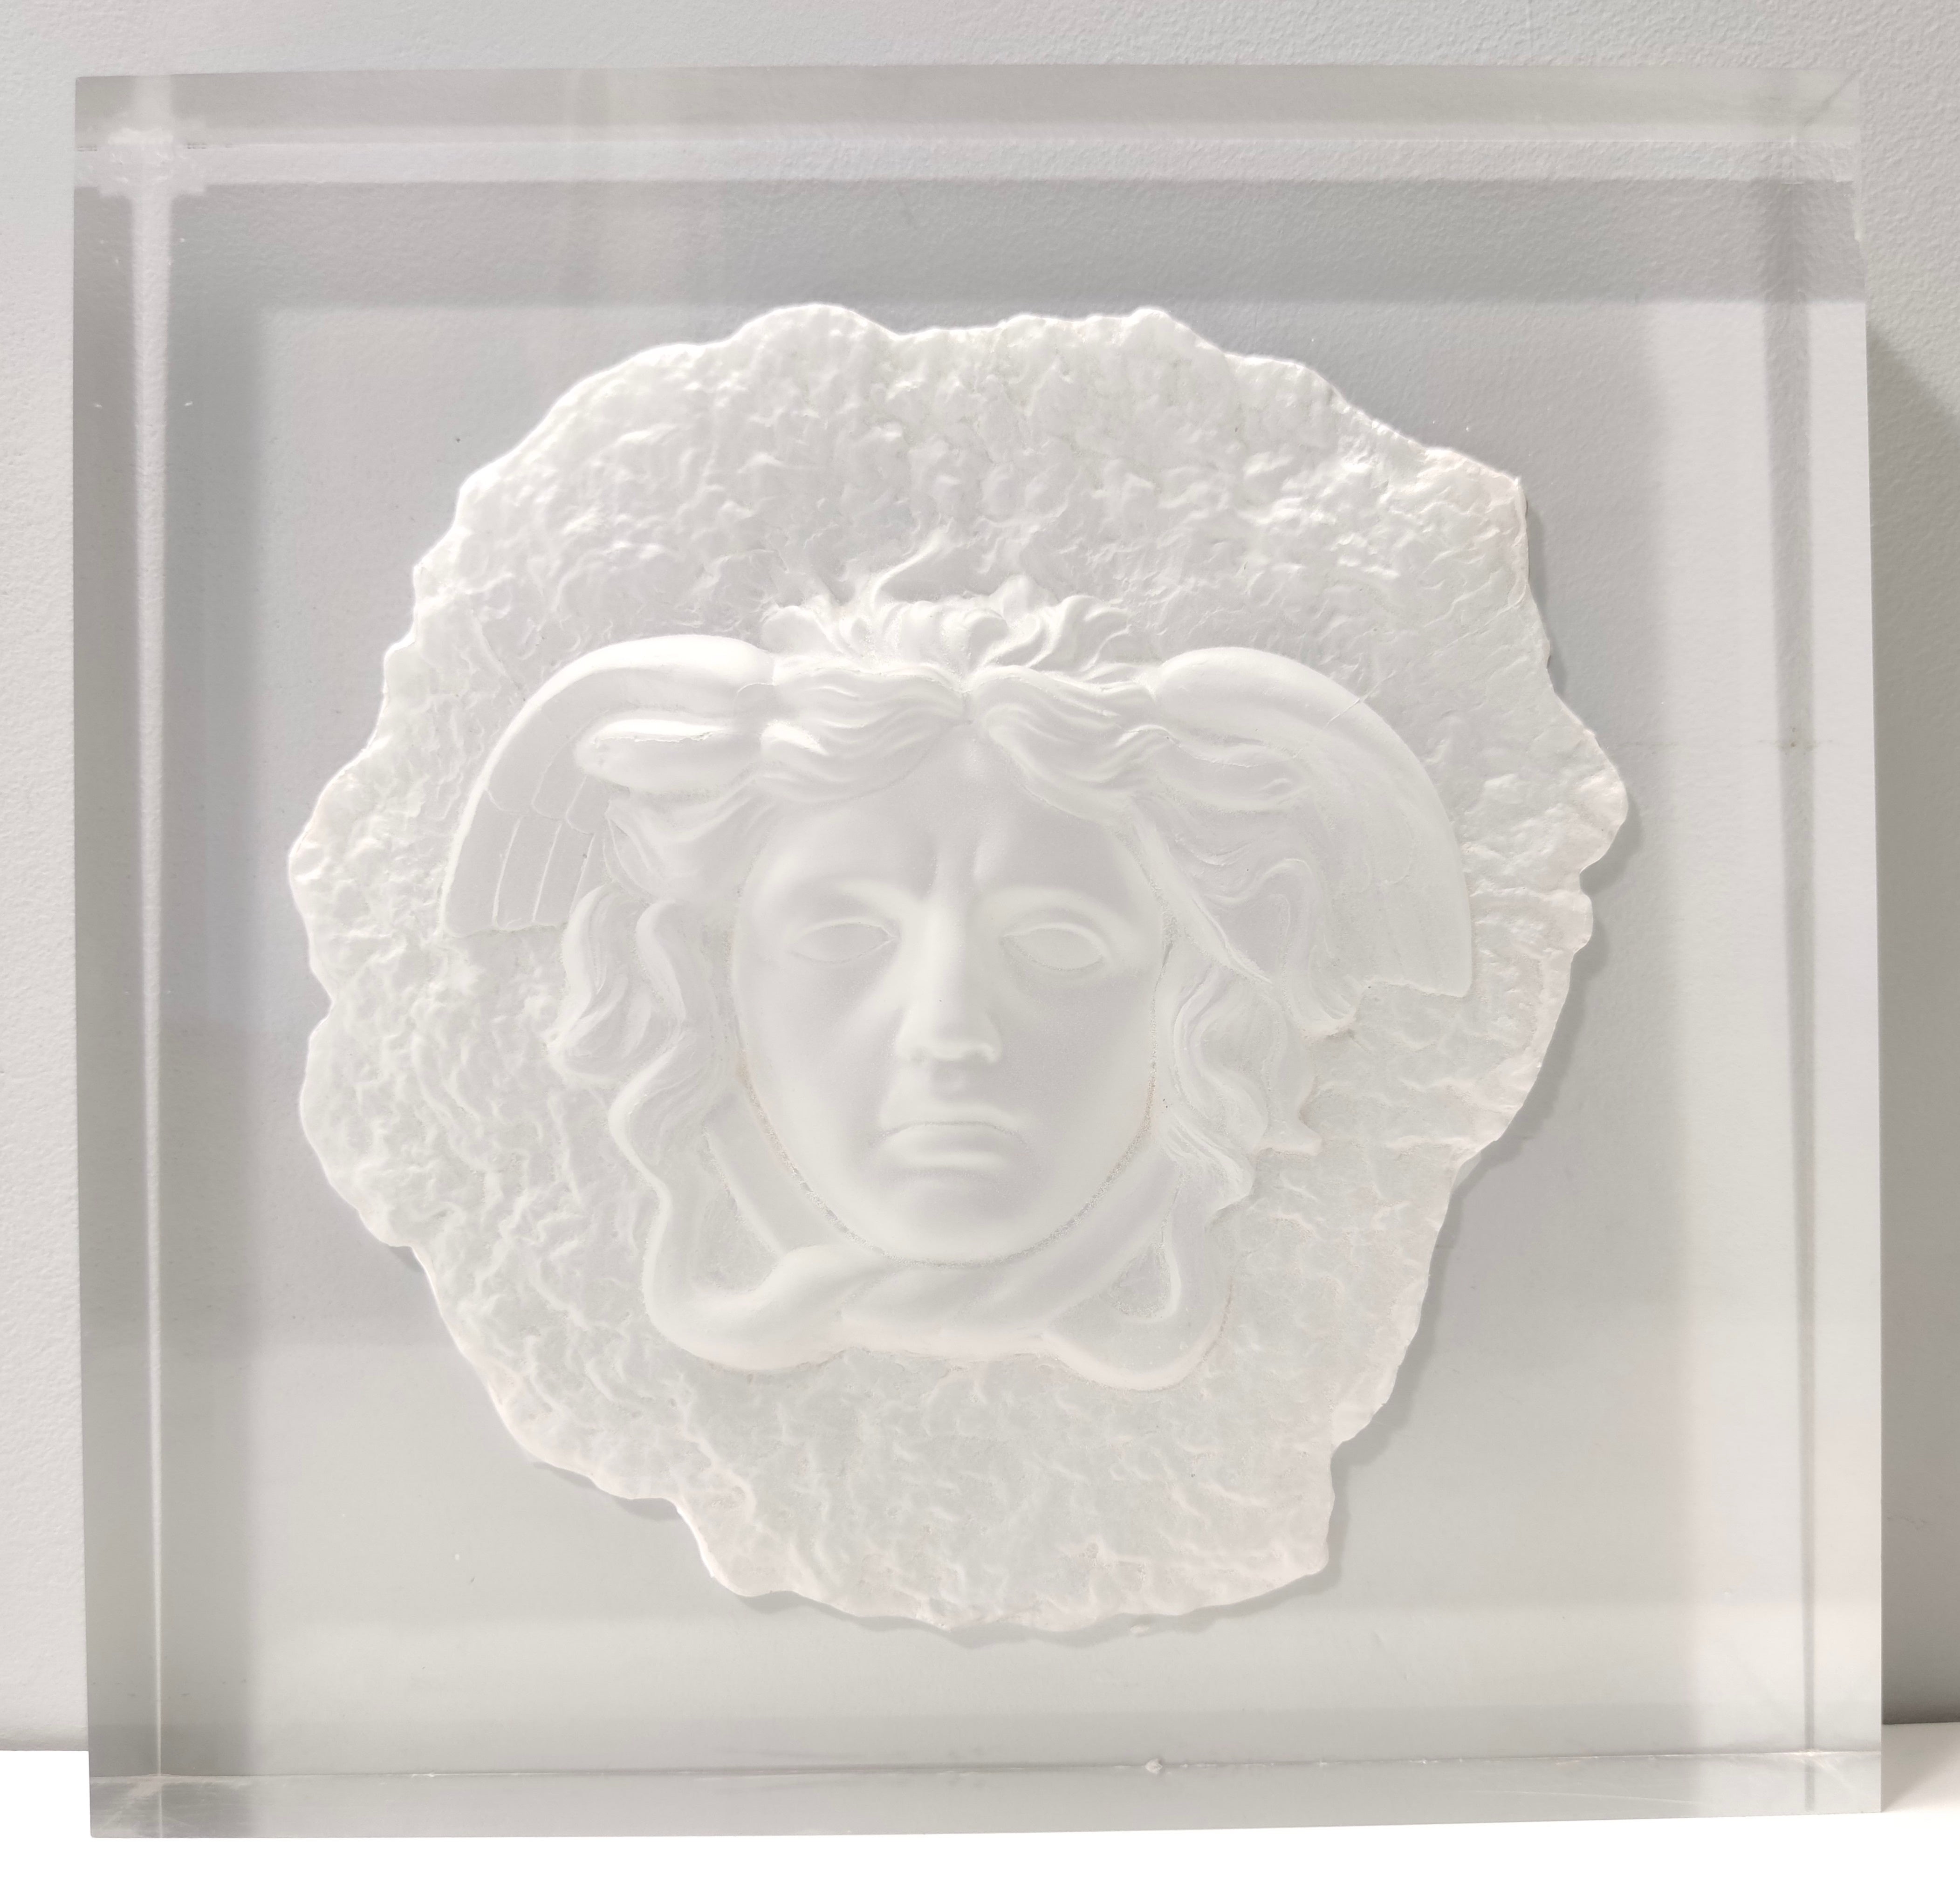 Made in Italy, 1990s.
This is a quite thick plexiglass panel with the gorgon by Versace.
Her face is carved into the plexiglass and this kind of work creates suggestive effects of movement.
It is a vintage piece, therefore it might show slight